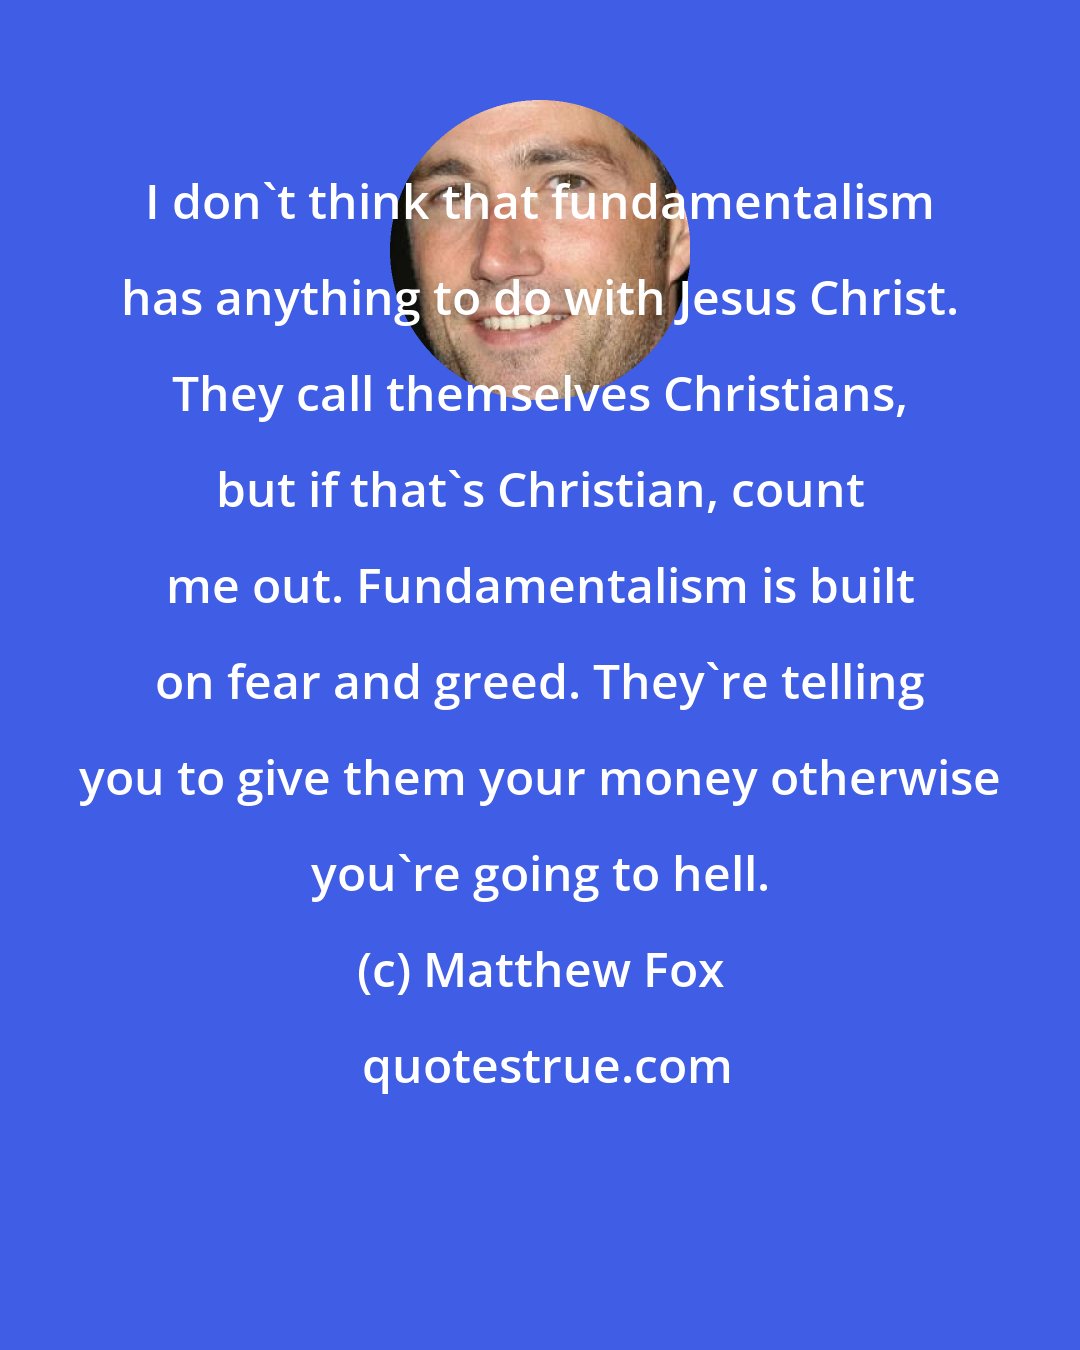 Matthew Fox: I don't think that fundamentalism has anything to do with Jesus Christ. They call themselves Christians, but if that's Christian, count me out. Fundamentalism is built on fear and greed. They're telling you to give them your money otherwise you're going to hell.